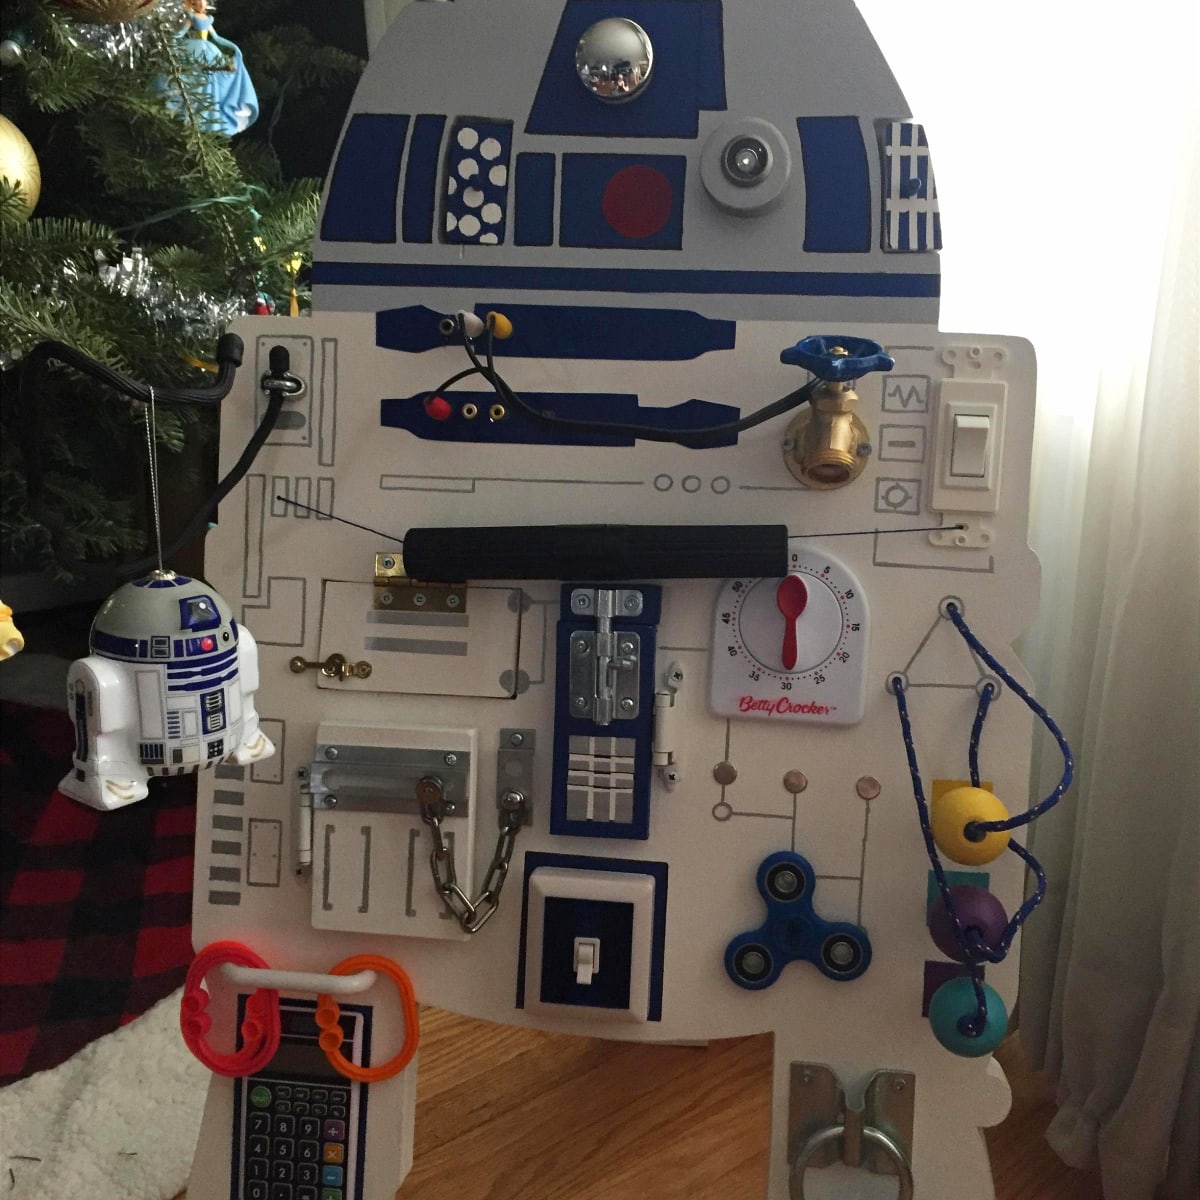 Toddler busy board idea to make - it's a Star Wars busy board! This R2-D2 sensory activity board is perfect for keeping your toddler busy while he / she fisgets with the gadgets and latches!